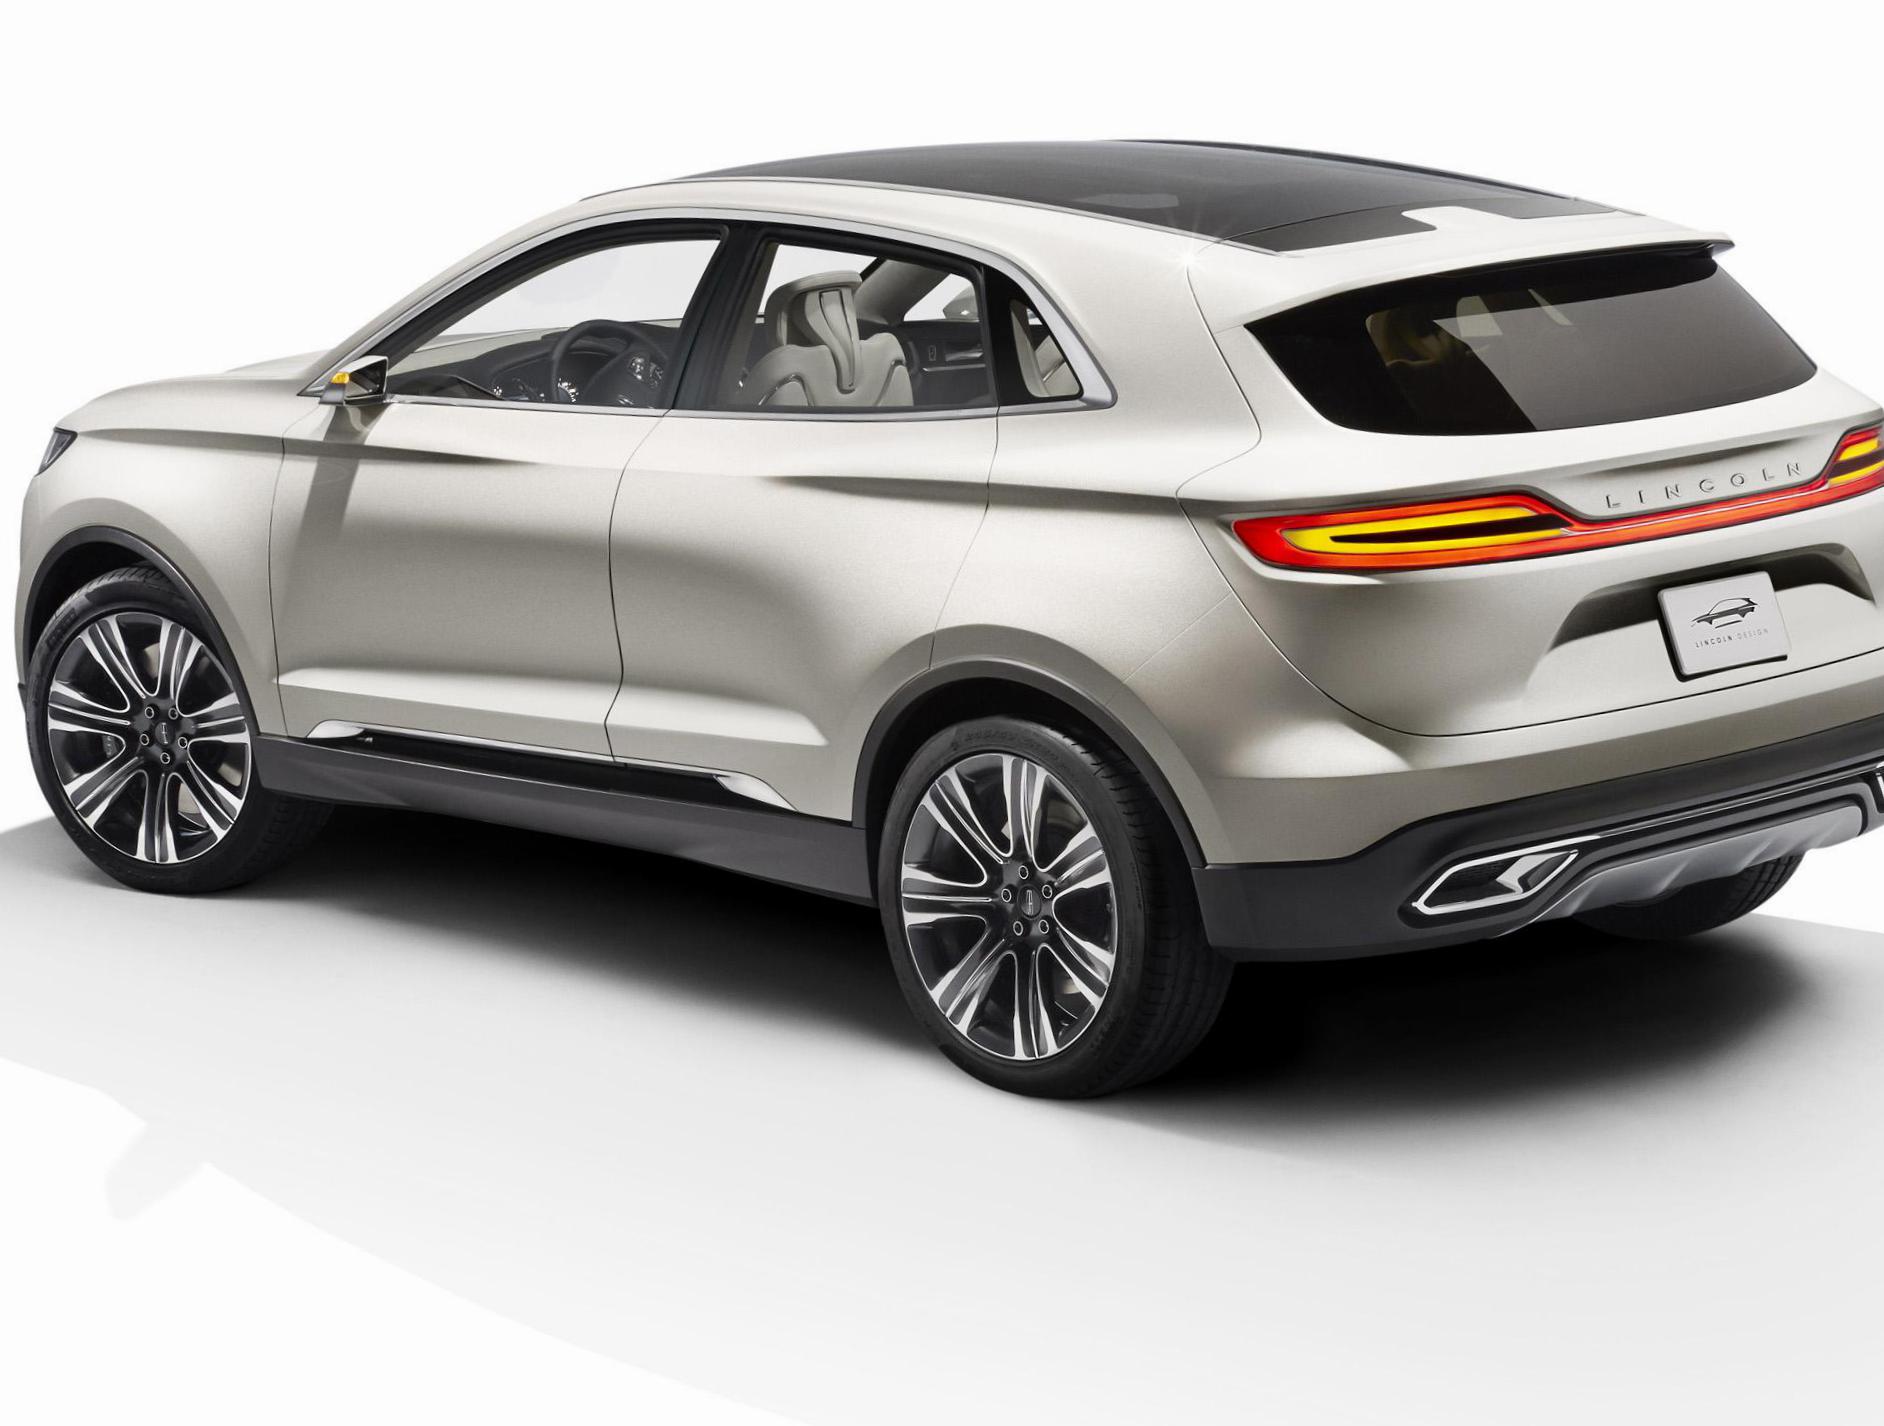 Lincoln MKC Photos and Specs. Photo MKC Lincoln used and 23 perfect